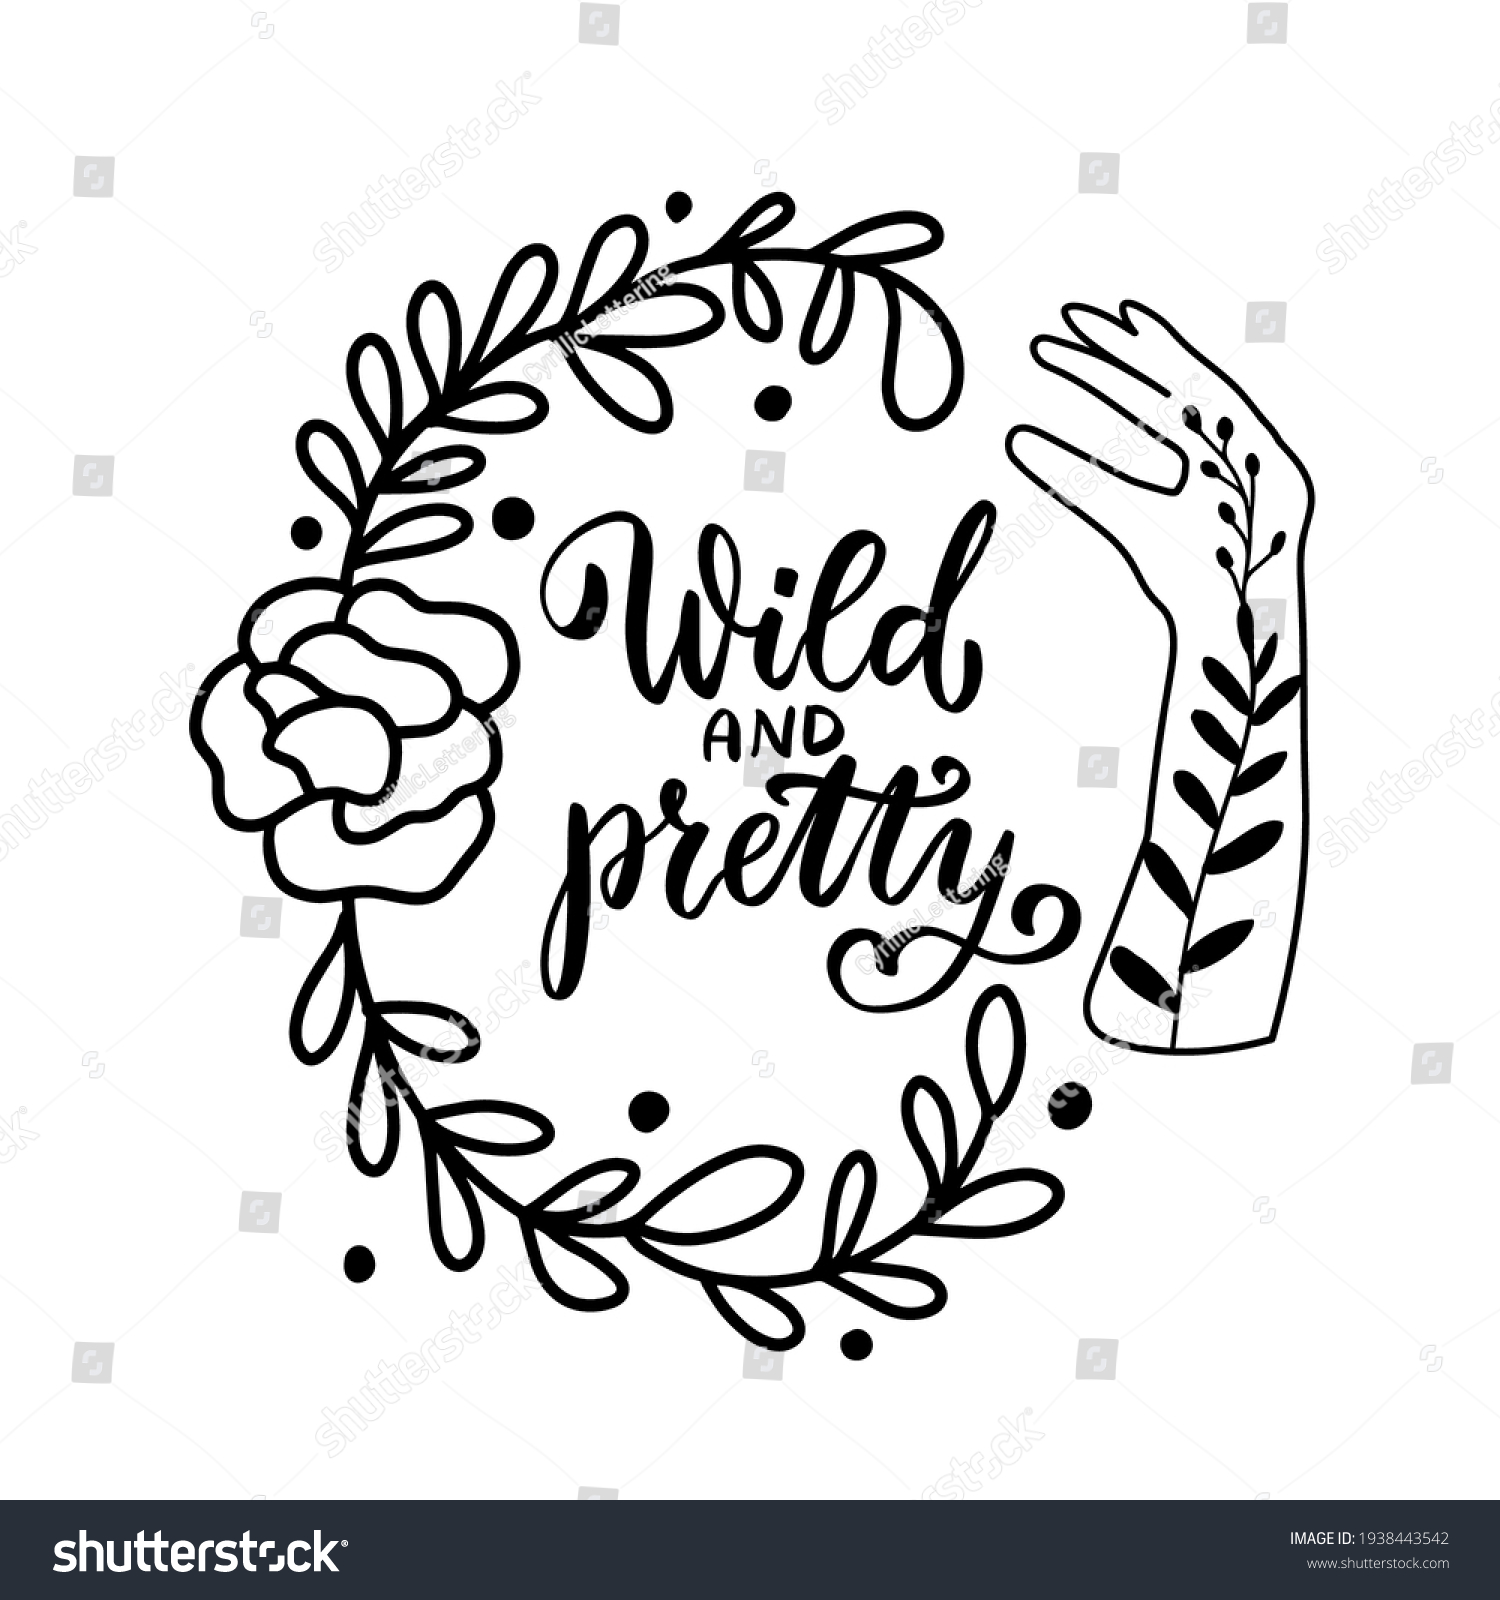 SVG of Wild and pretty. Hand lettering boho celestial quote. Wild flowers with mehndi womans hand floral tattoo. Gypsy rustic silhouette bohemian vector illustration for shirt design. Boho clipart.  svg